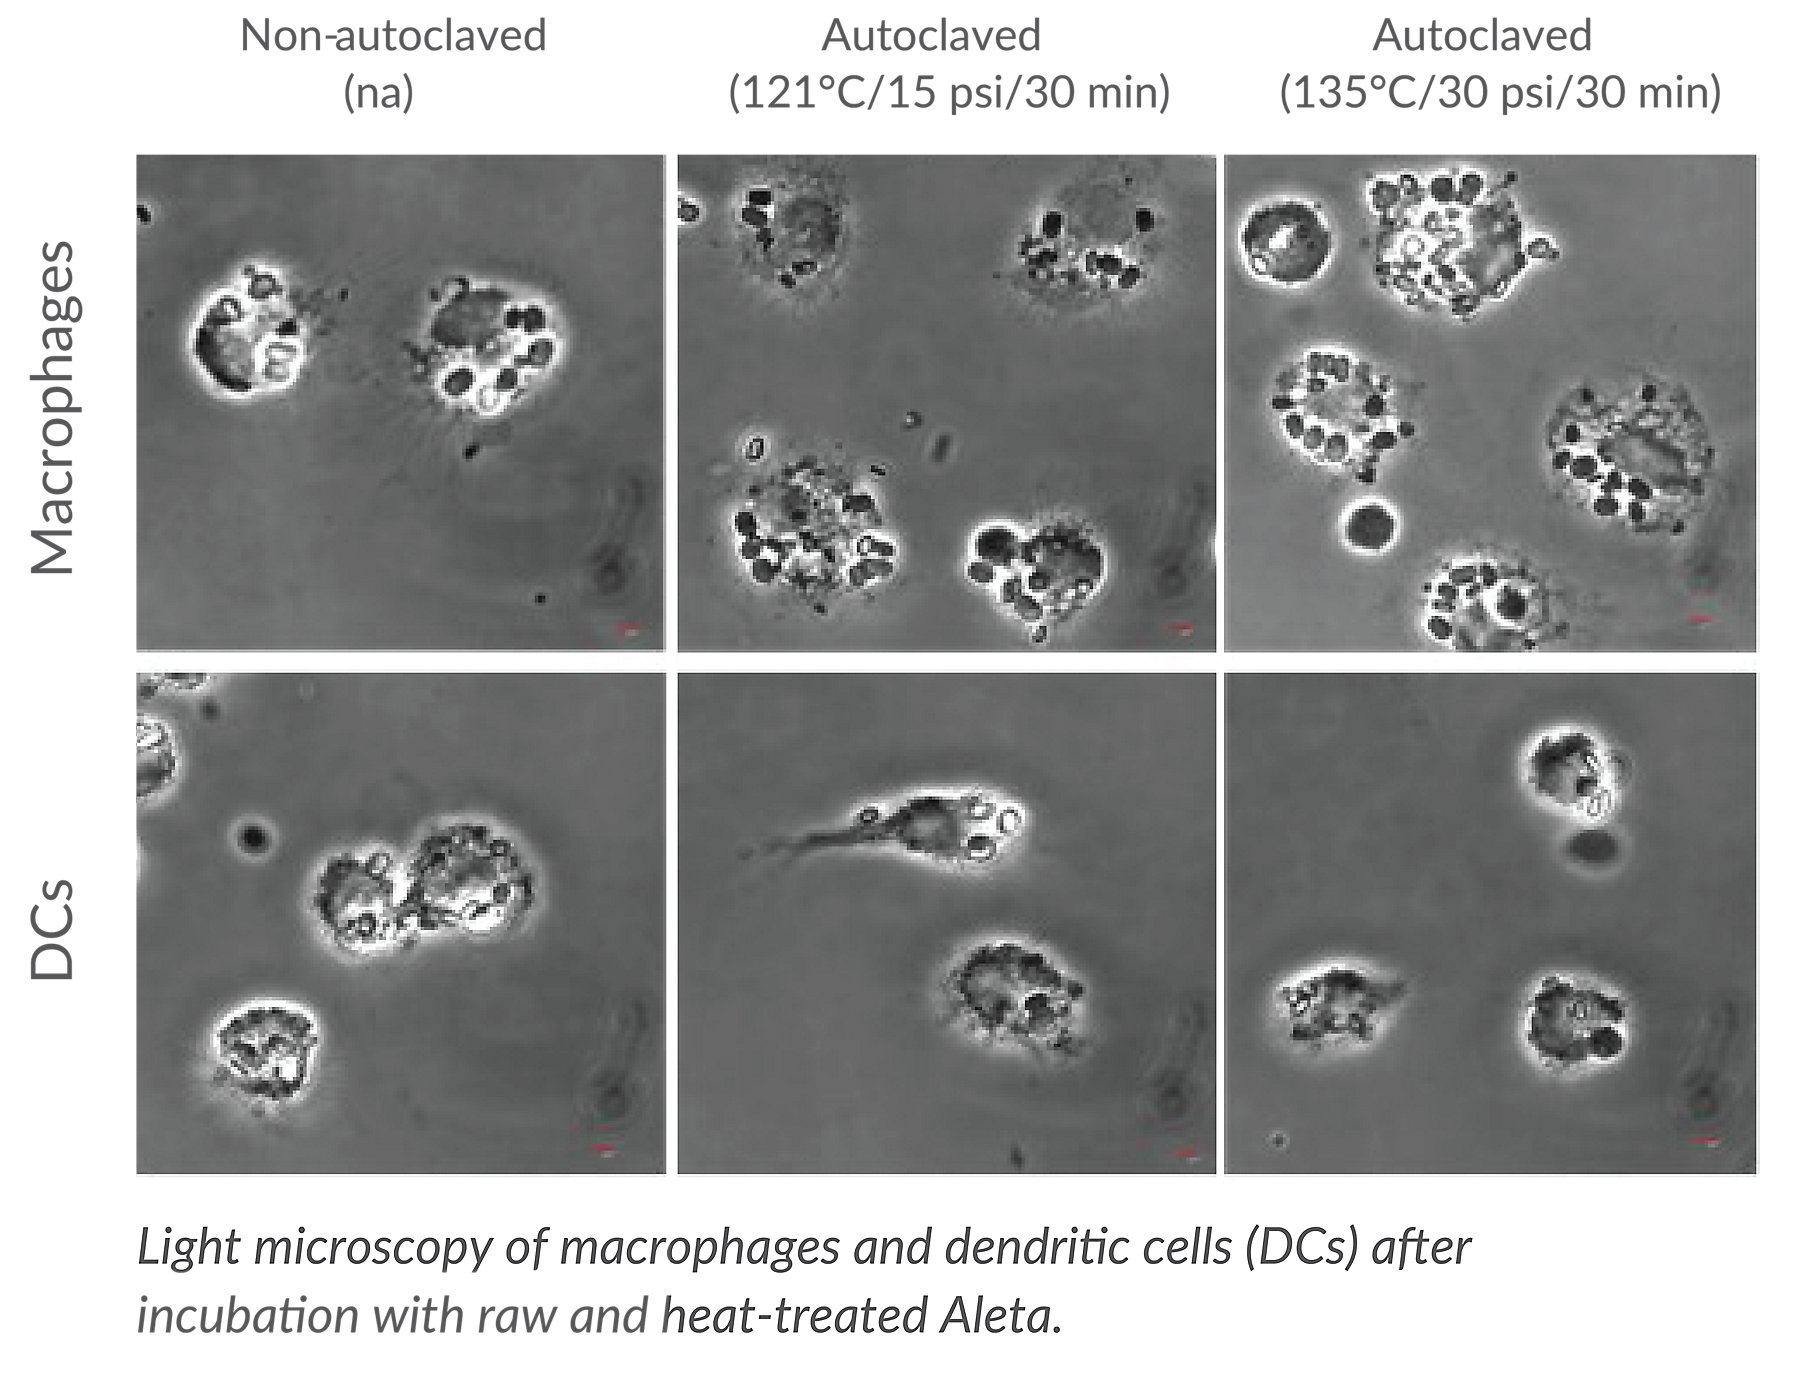 KAA Aleta Light microscopy of macrophages and dendritic cells with Aleta